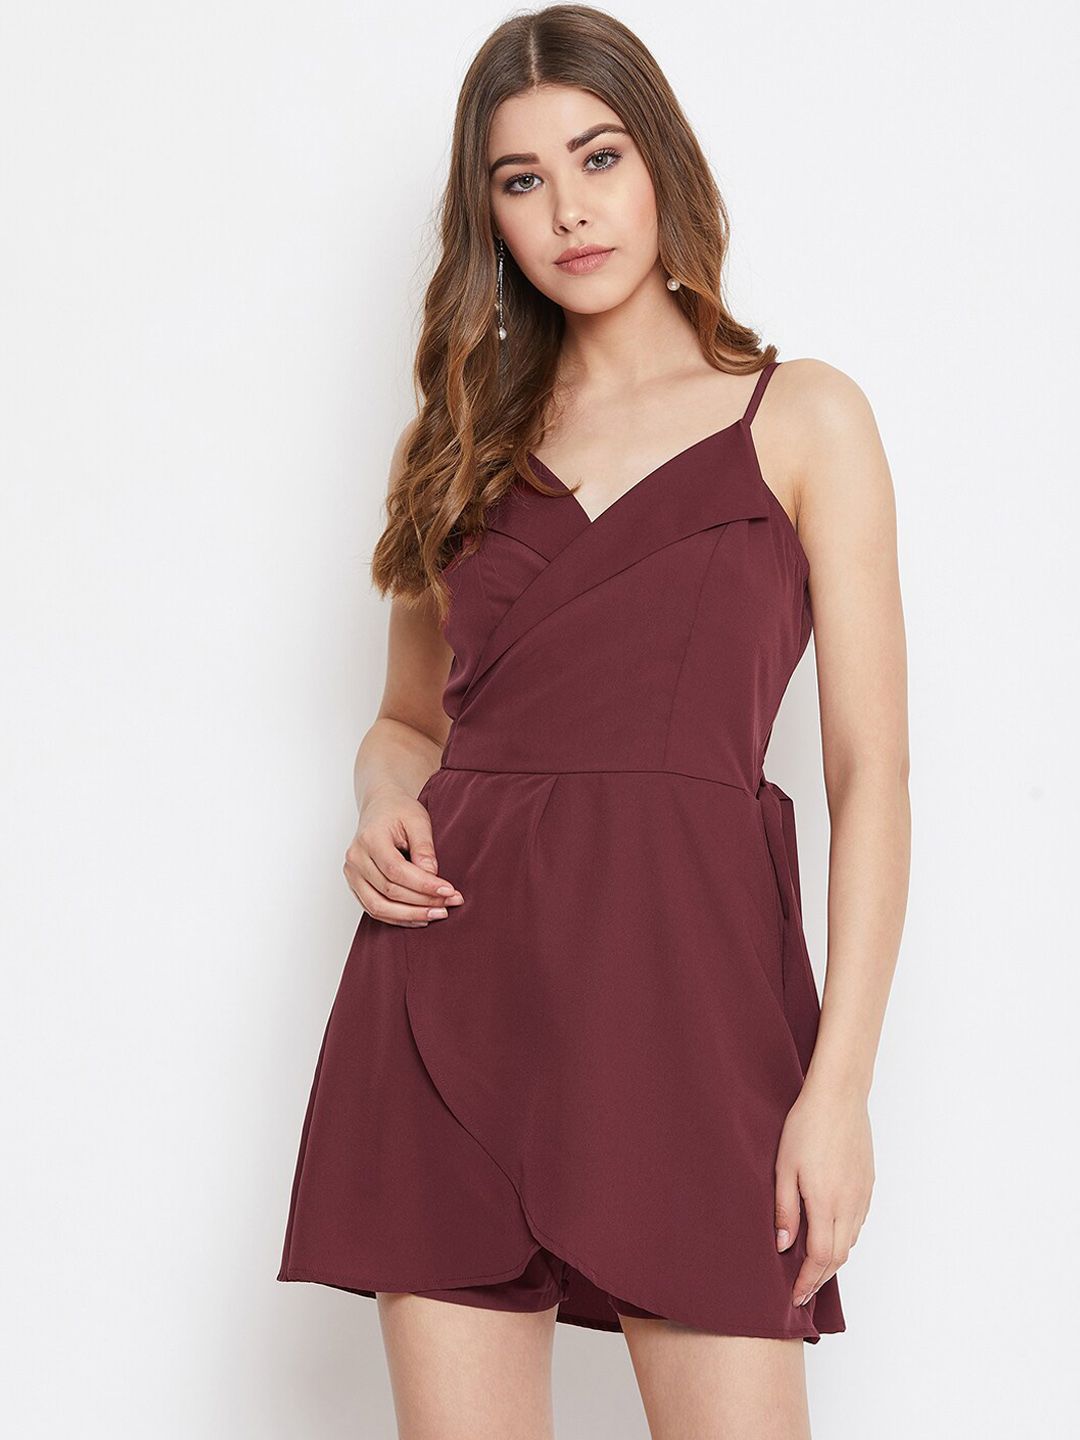 Berrylush Women Burgundy Solid Layered Playsuit Price in India